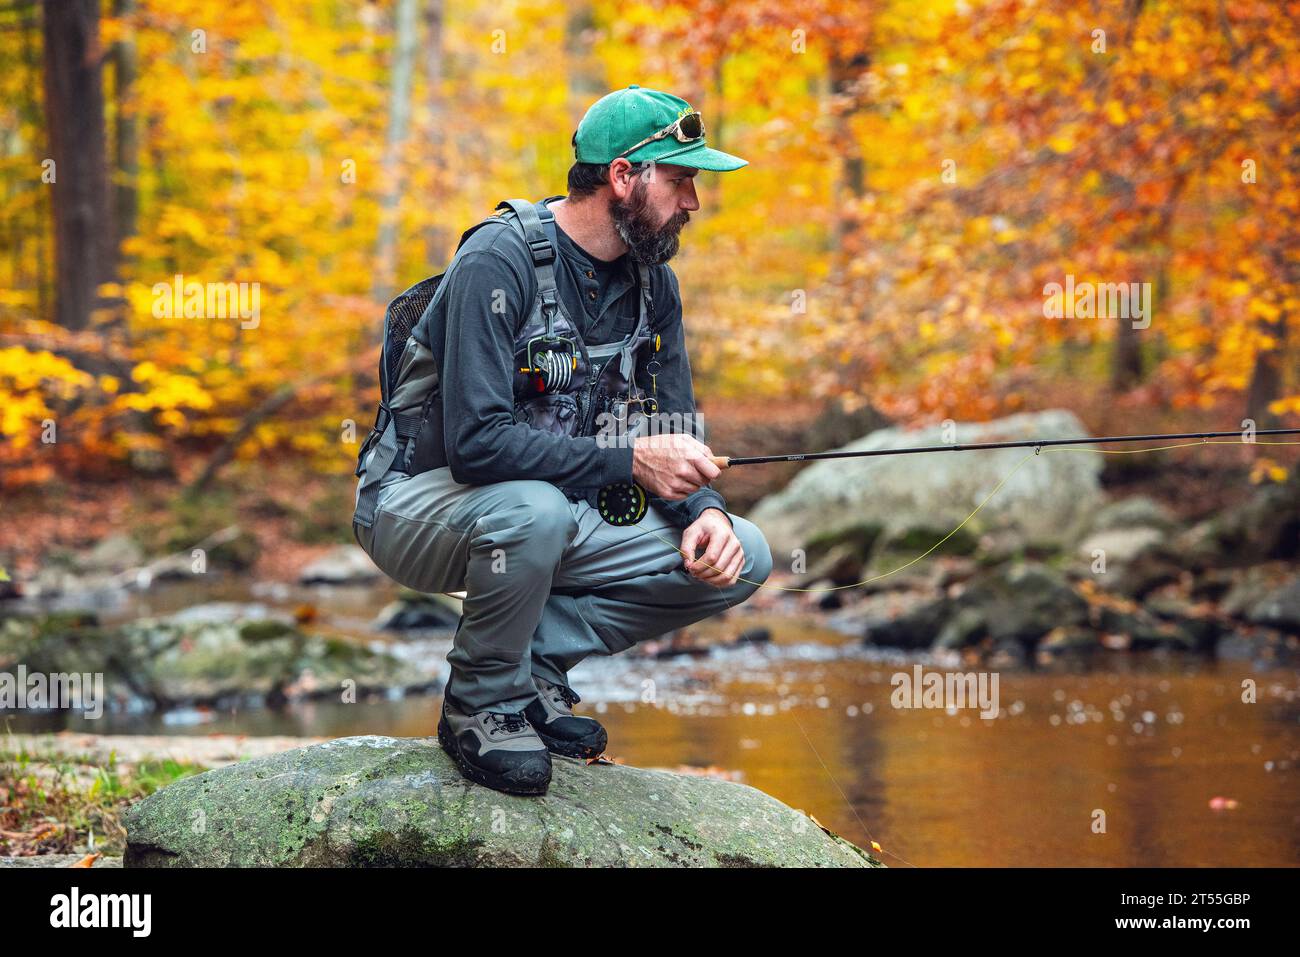 Man searching and fly fishing on a bright sunny colorful fall day Stock Photo